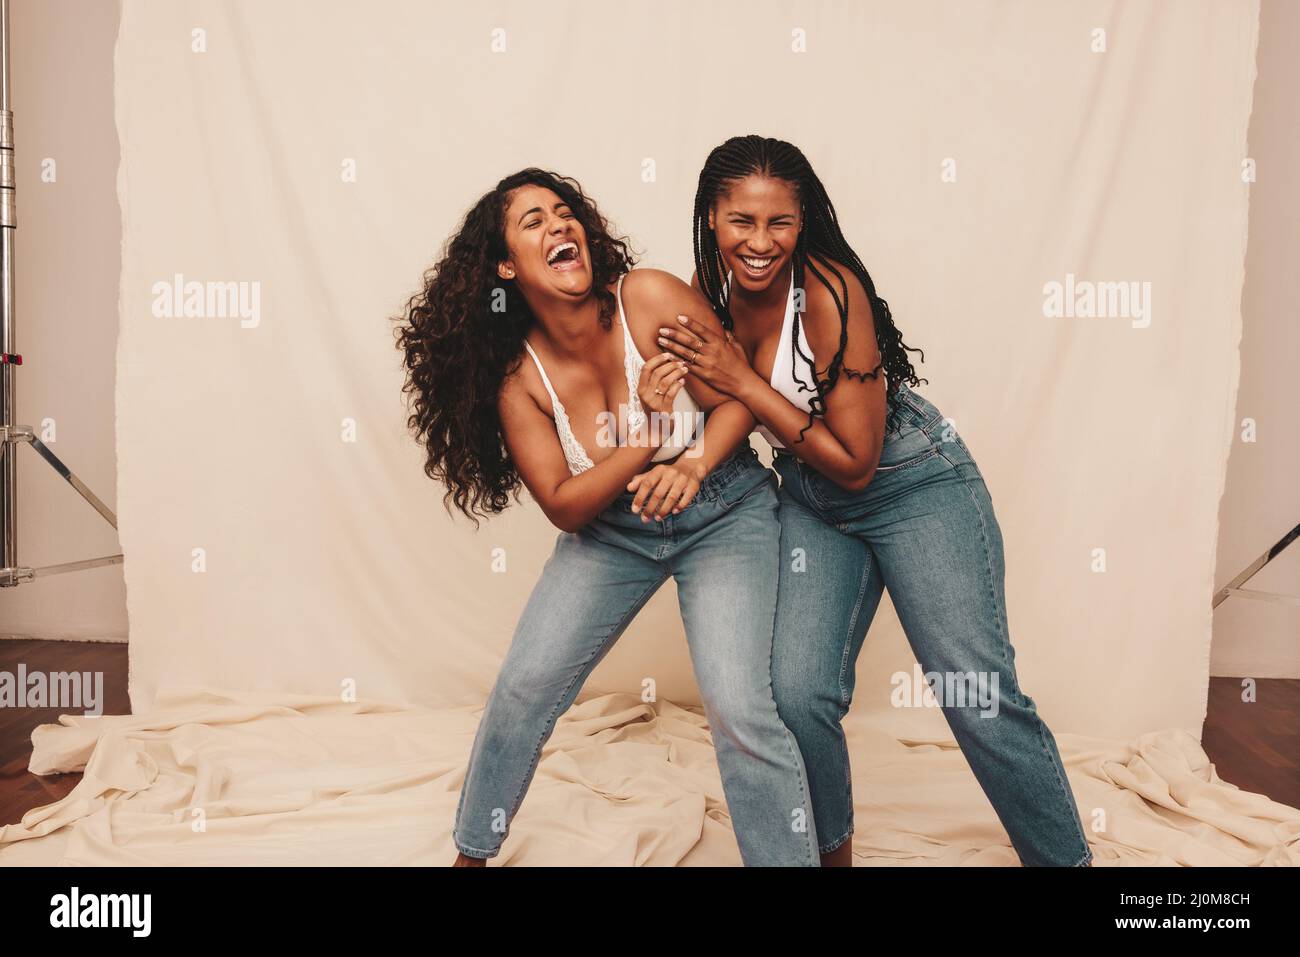 Fun in the studio. Two cheerful young women laughing and being playful while wearing denim jeans against a studio background. Two happy female friends Stock Photo